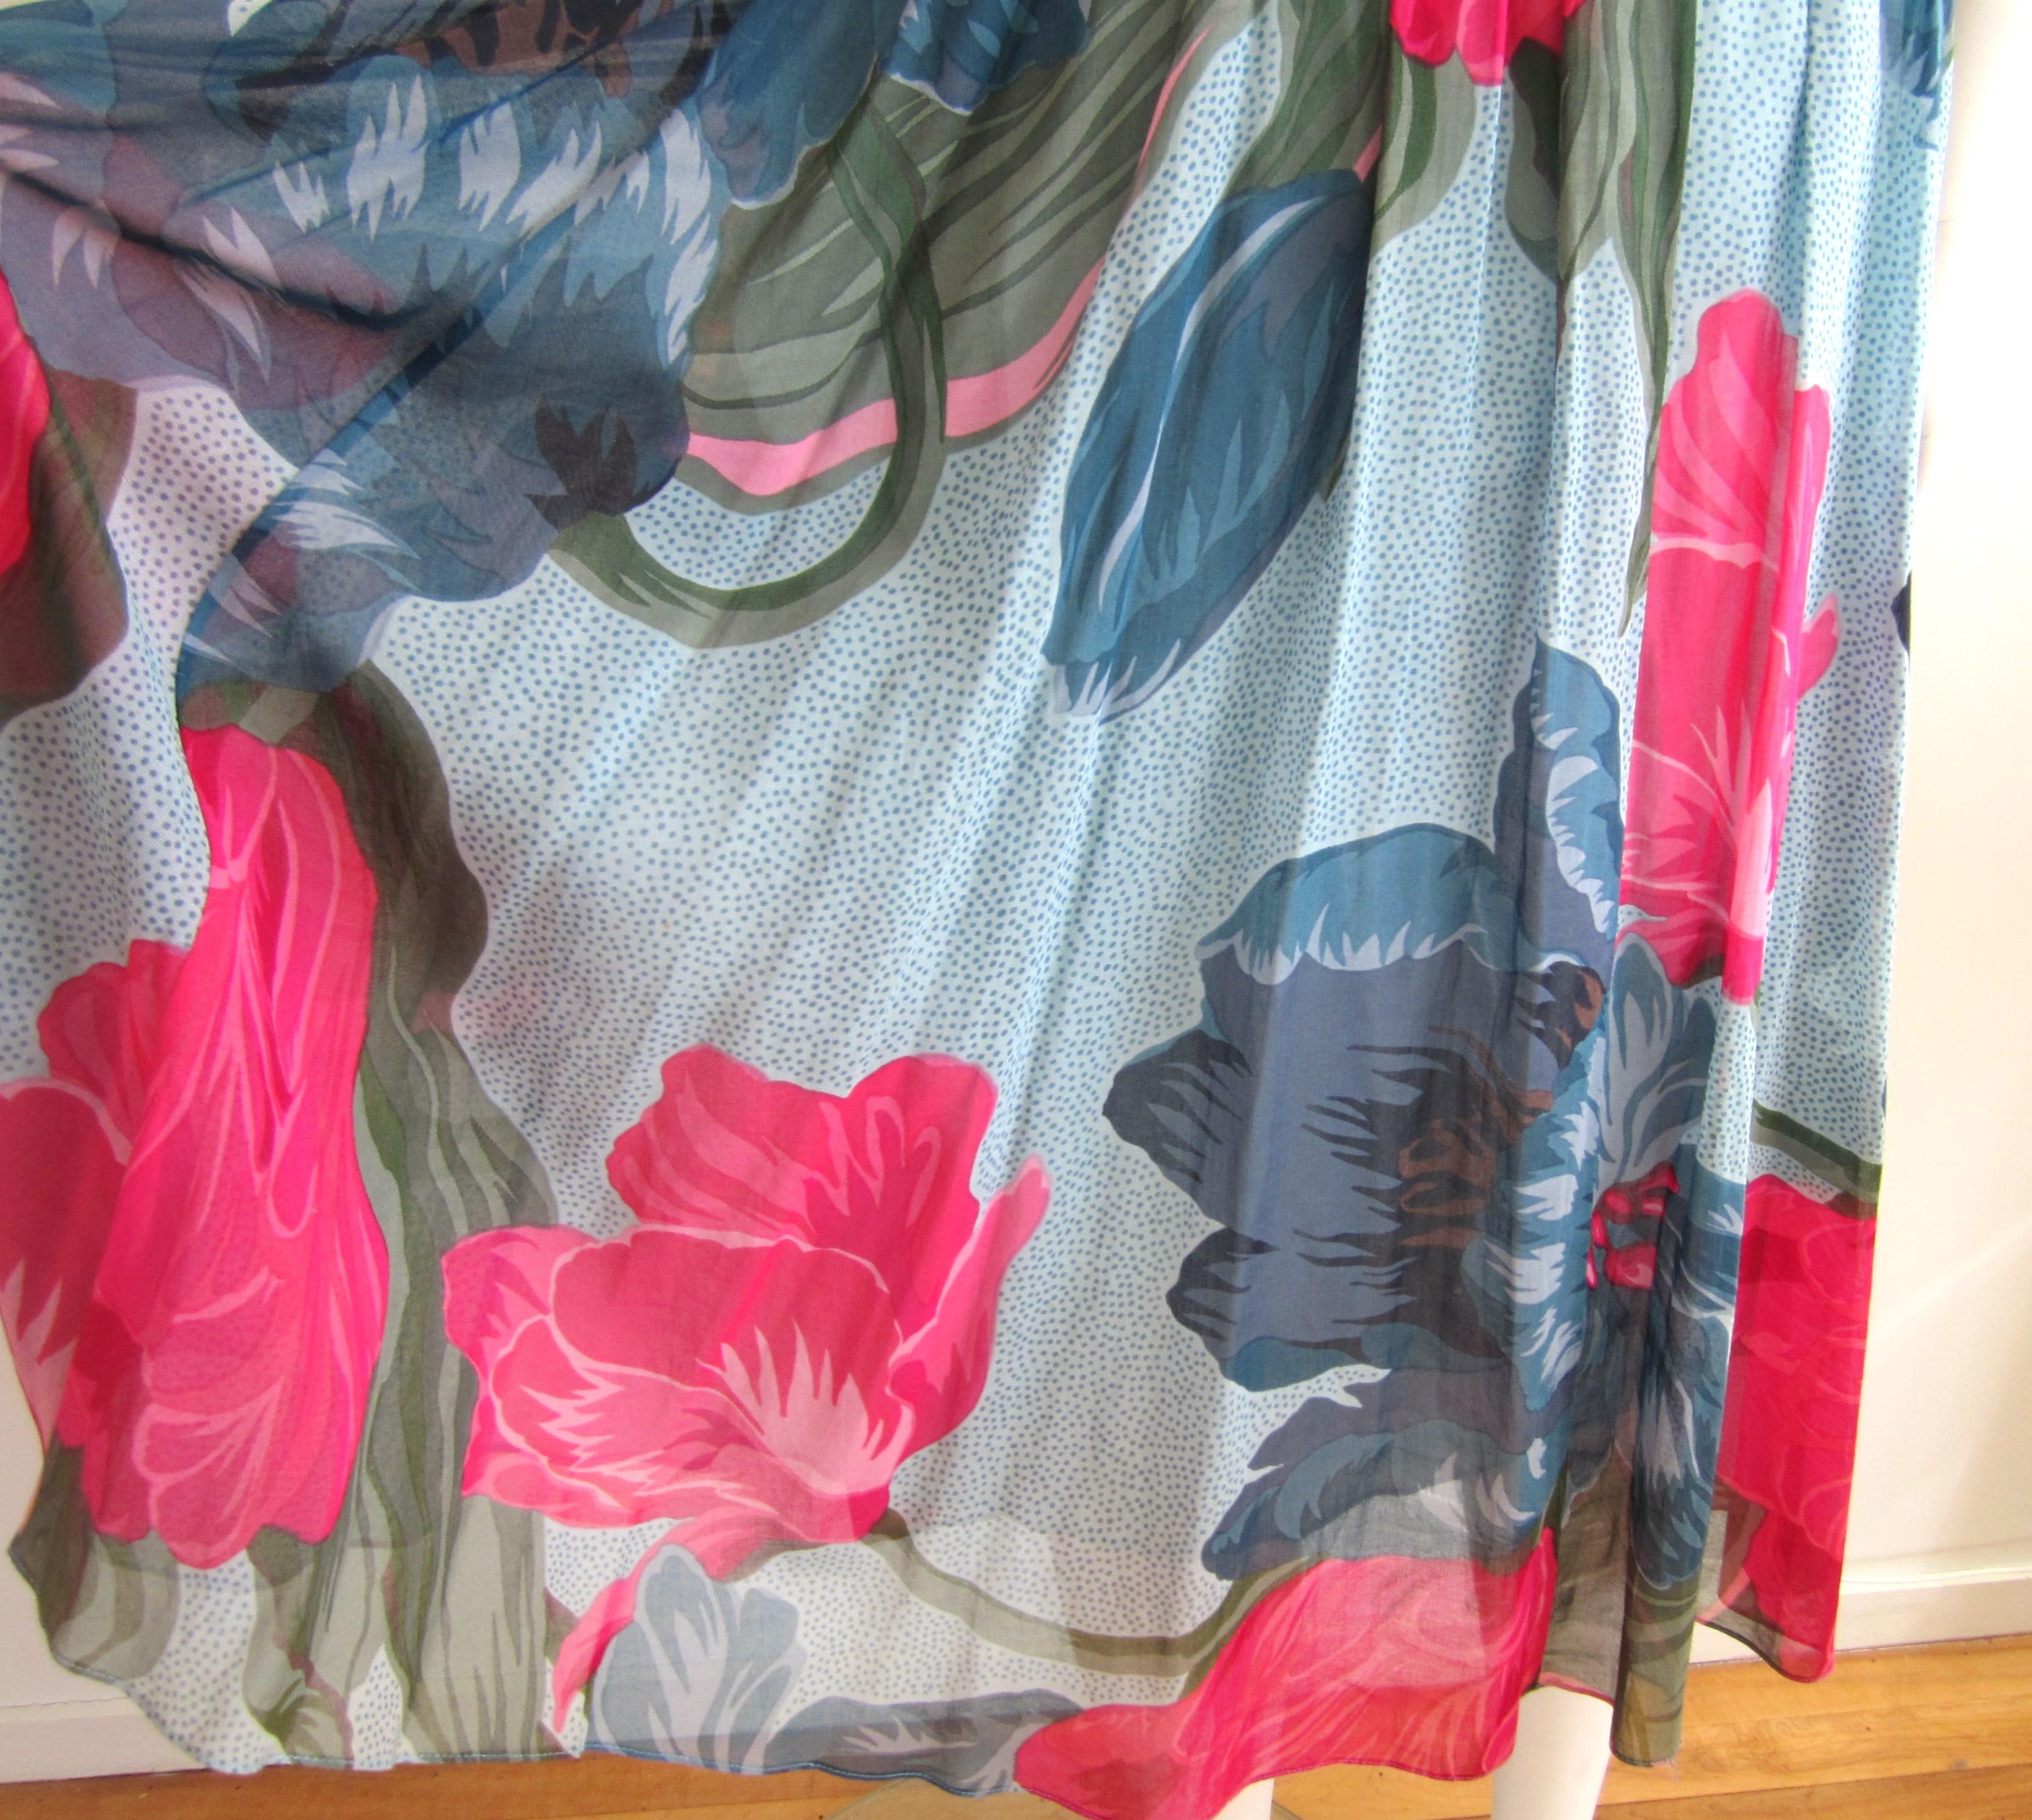  Hanae Mori REDS & Blue Floral Printed  Dress 1980s Vintage  In Good Condition For Sale In Wallkill, NY